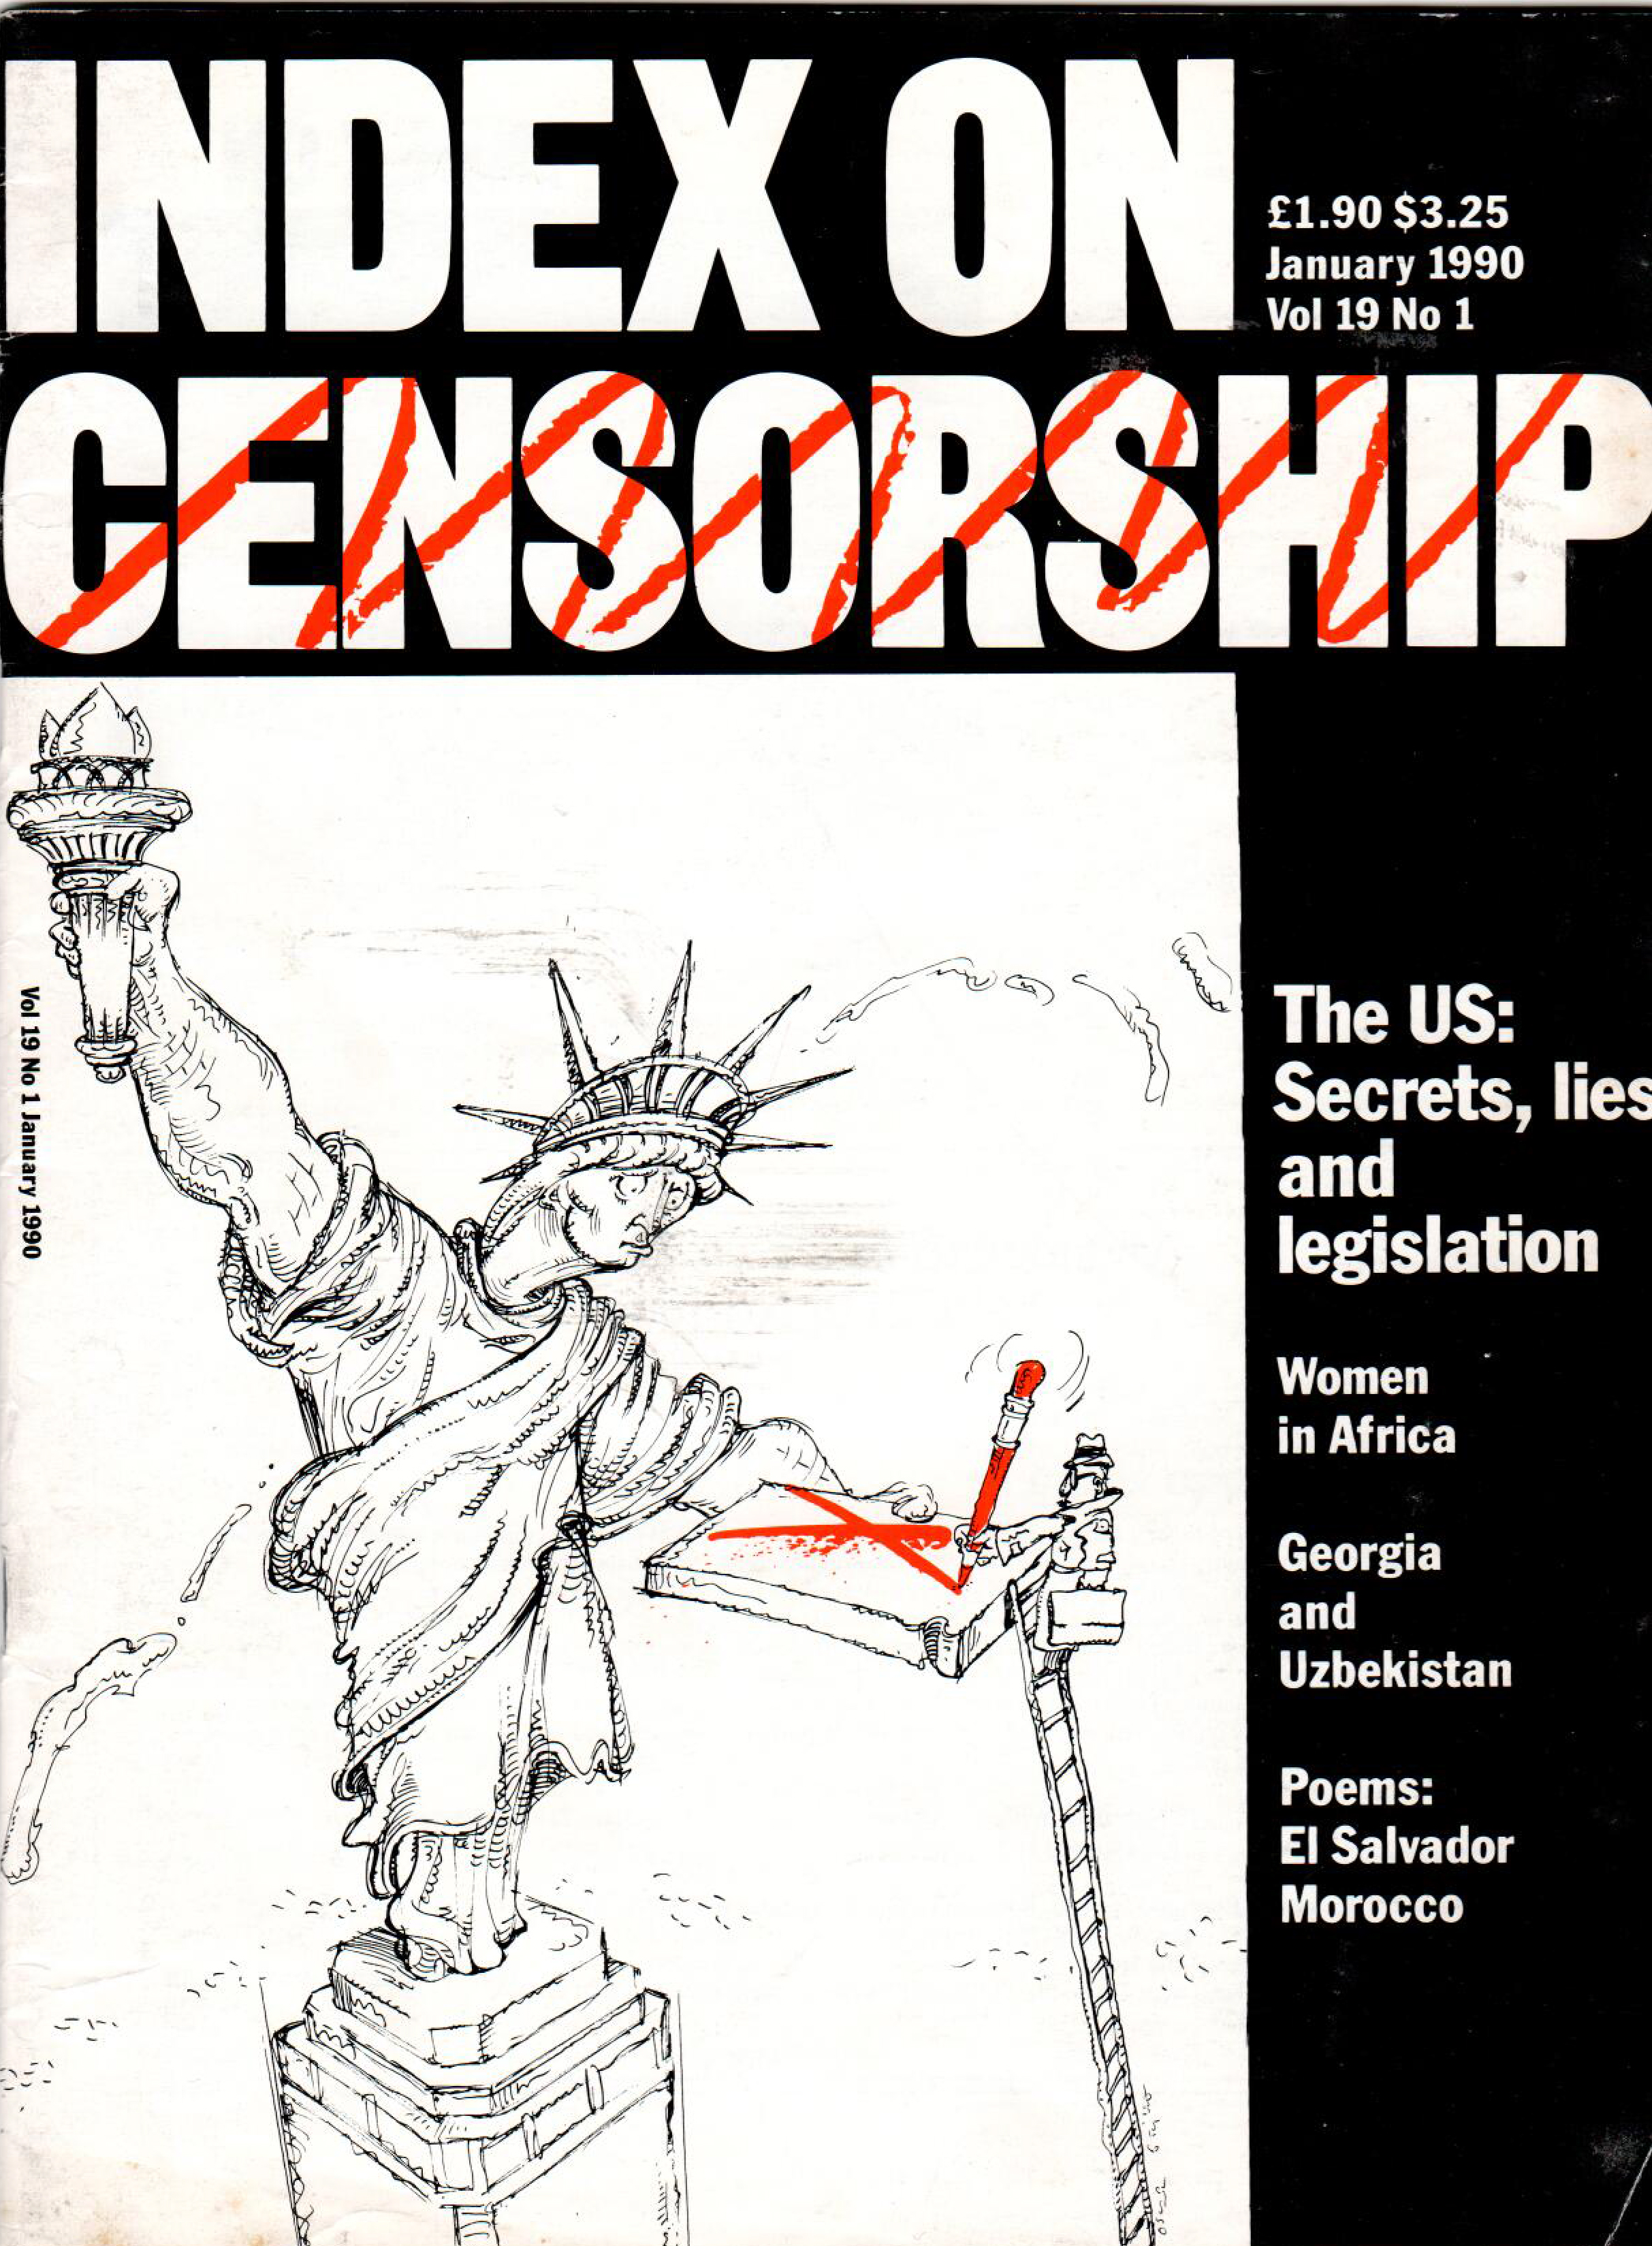 The US: Spies, lies and legislation, the January 1990 issue of Index on Censorship magazine.